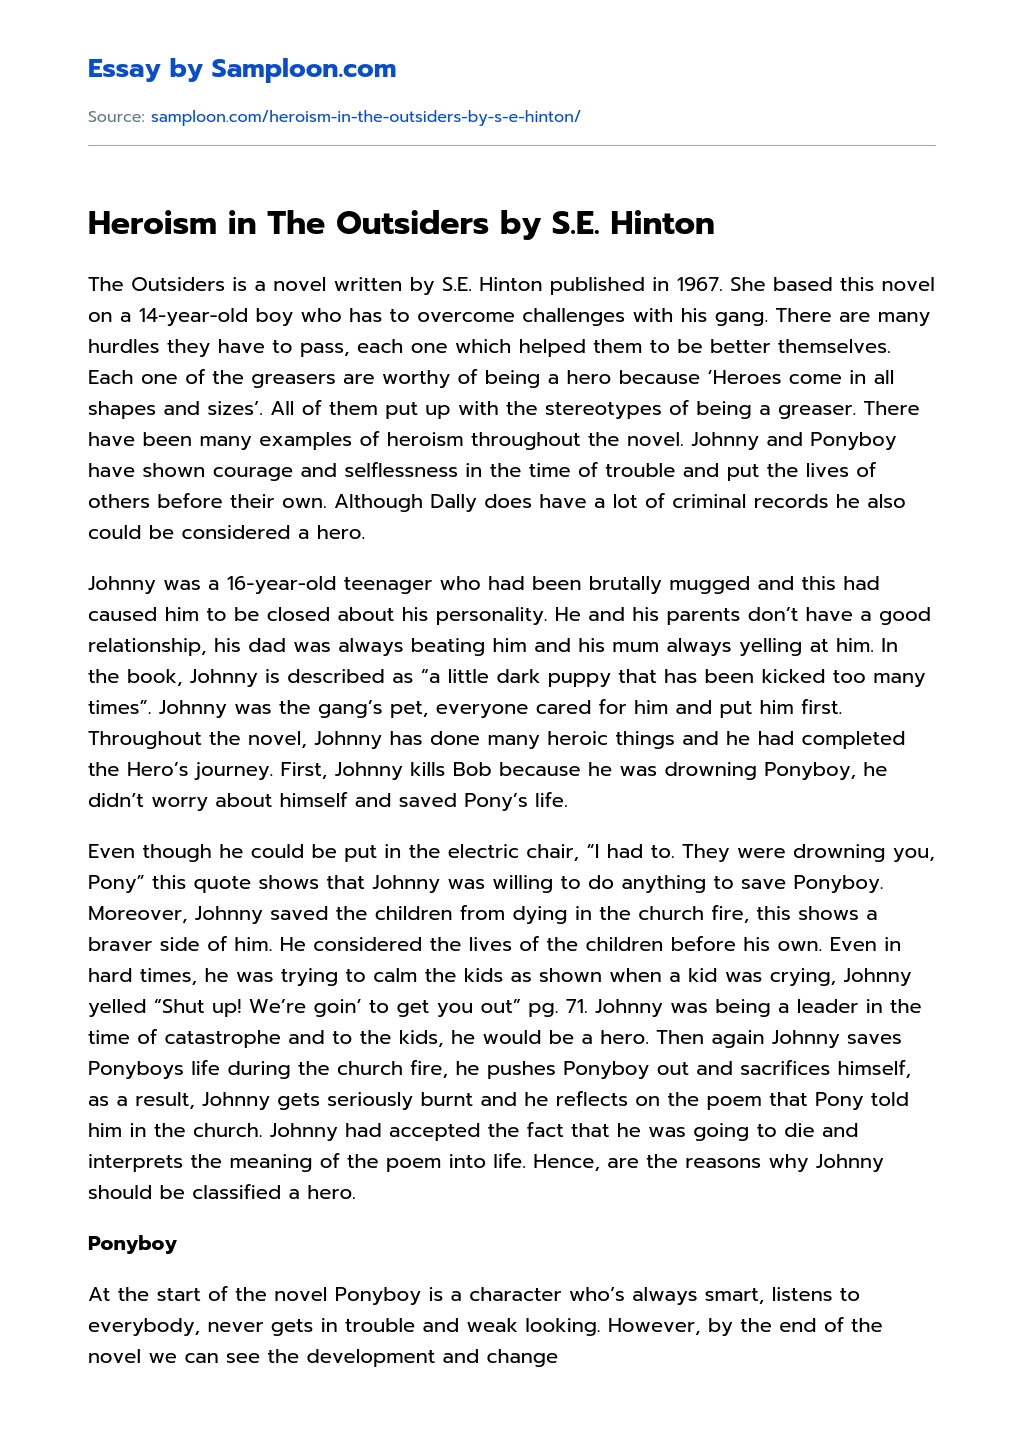 Heroism in The Outsiders by S.E. Hinton essay